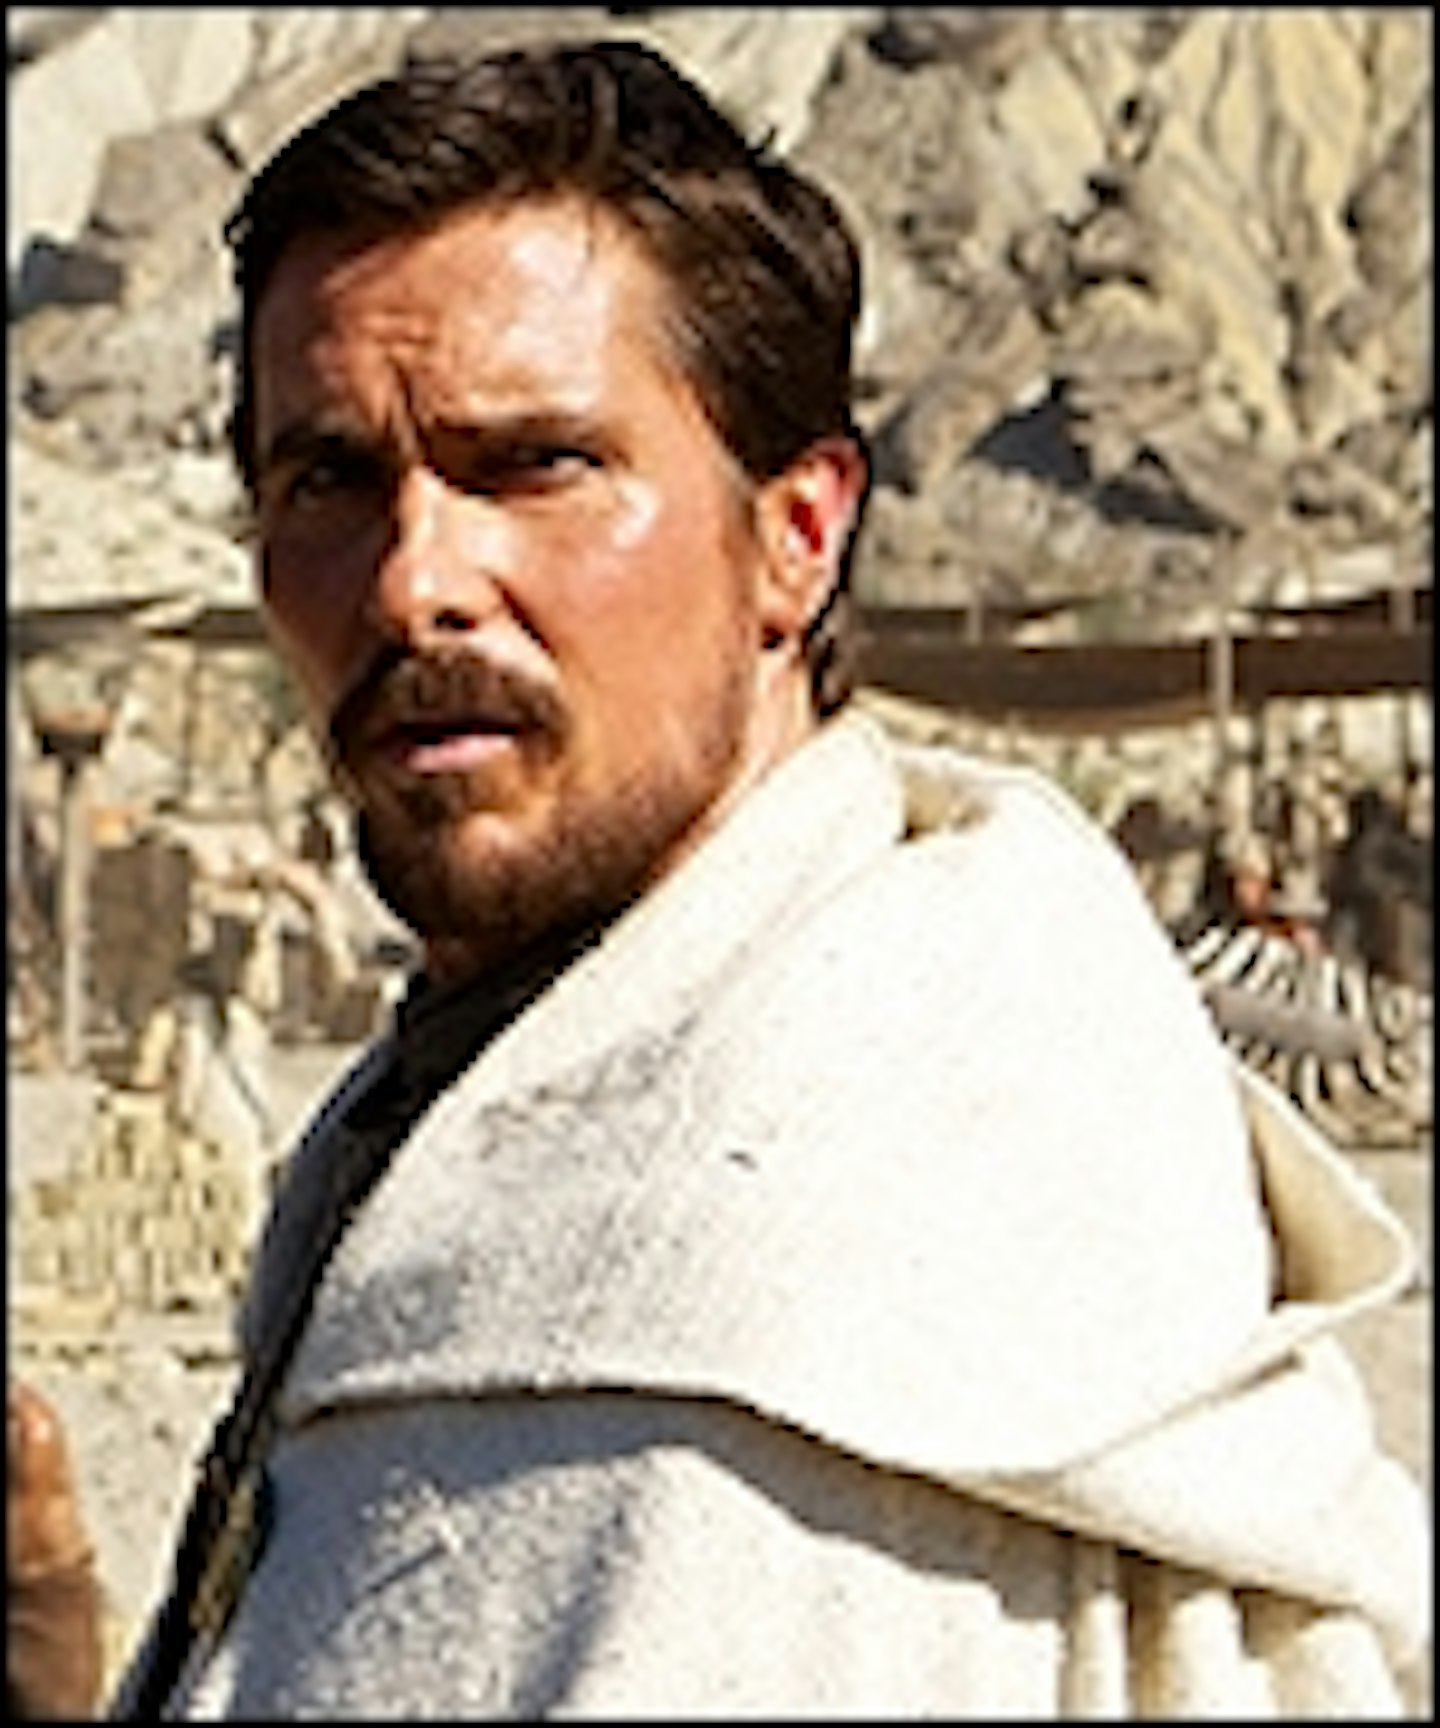 New Stills Land From Exodus: Gods And Kings 